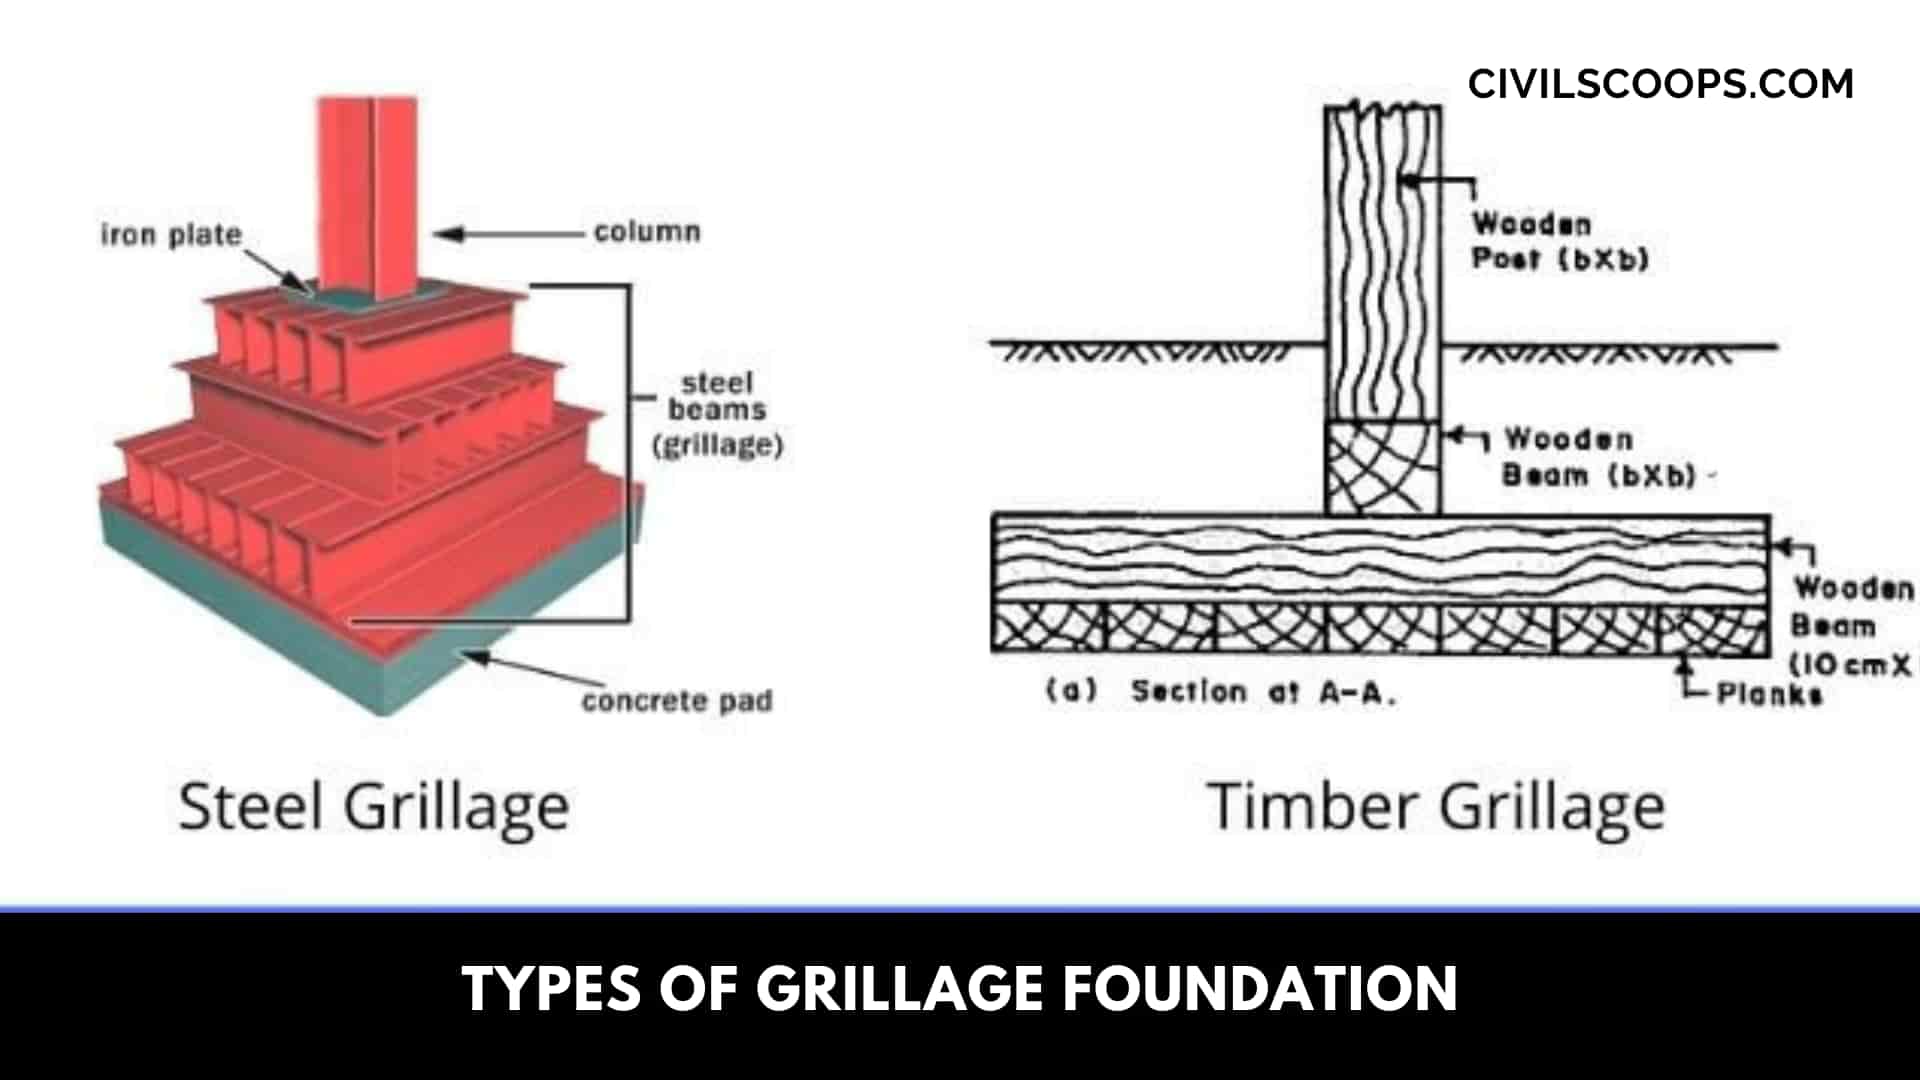 Types of Grillage Foundation